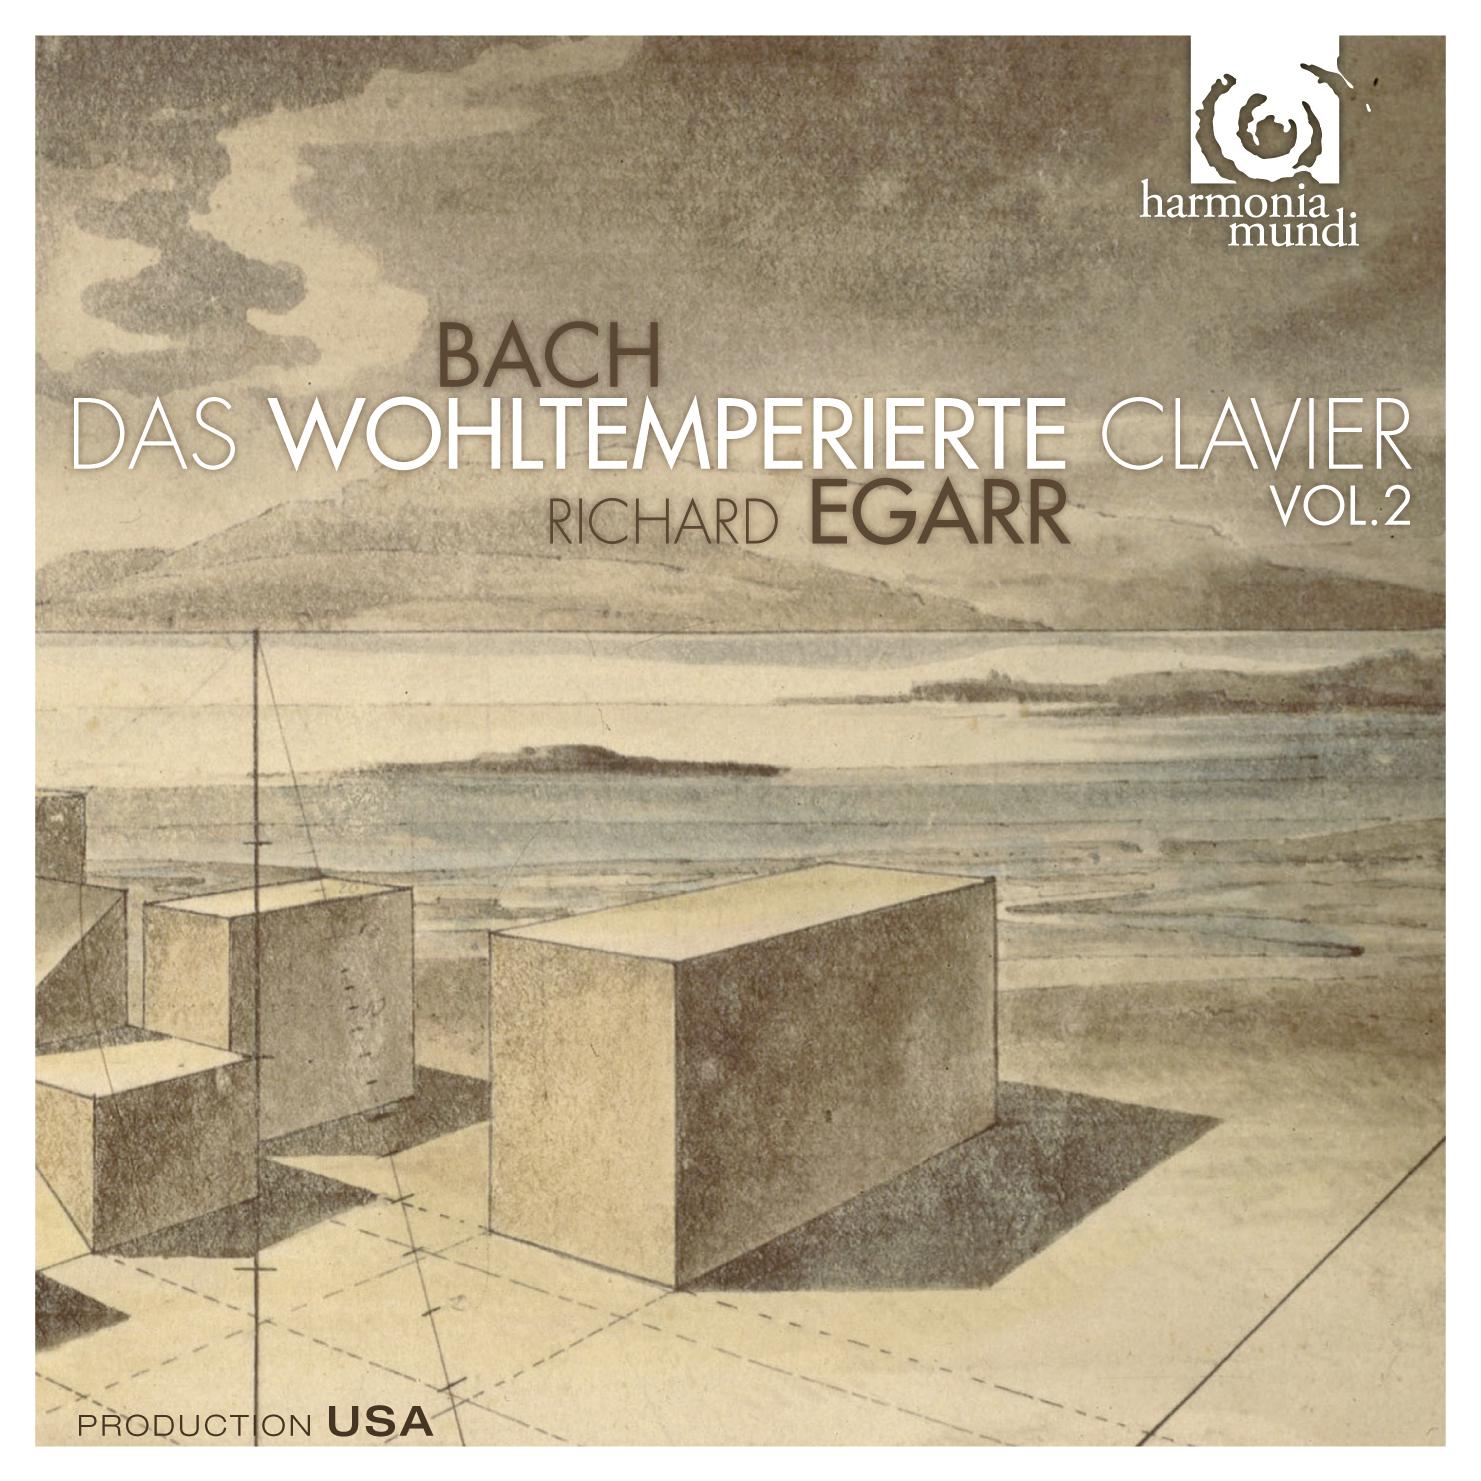 Well-Tempered Clavier, Book II, BWV 870-893: Prelude XIX in A Major, BWV 888